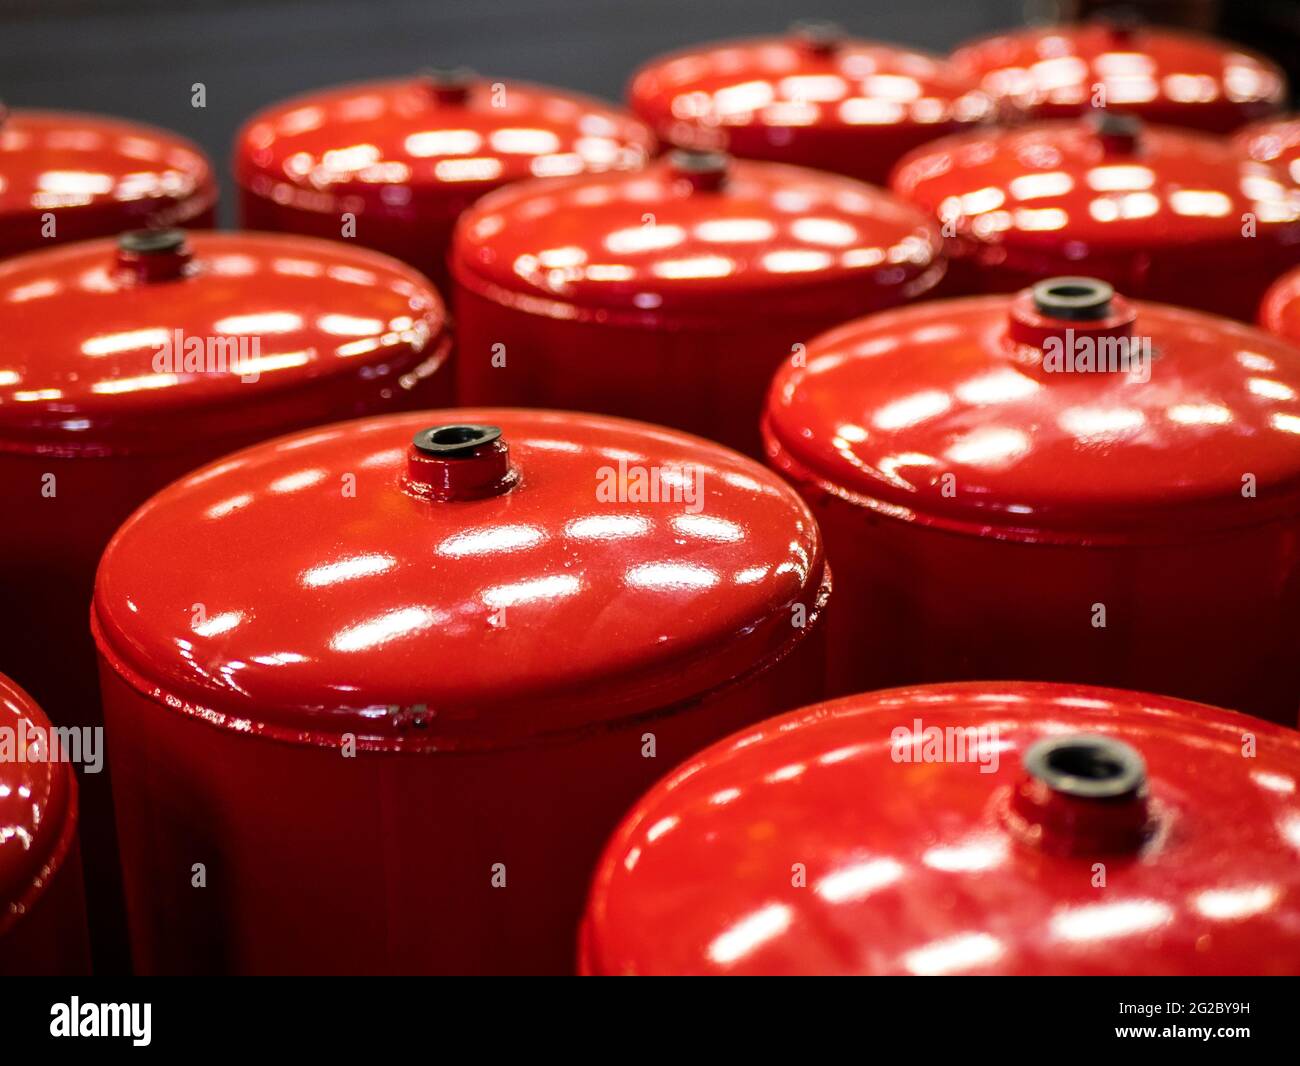 Compressed air tanks for vehicles. Air reservoirs for air suspension systems. Red tractor air tanks Stock Photo